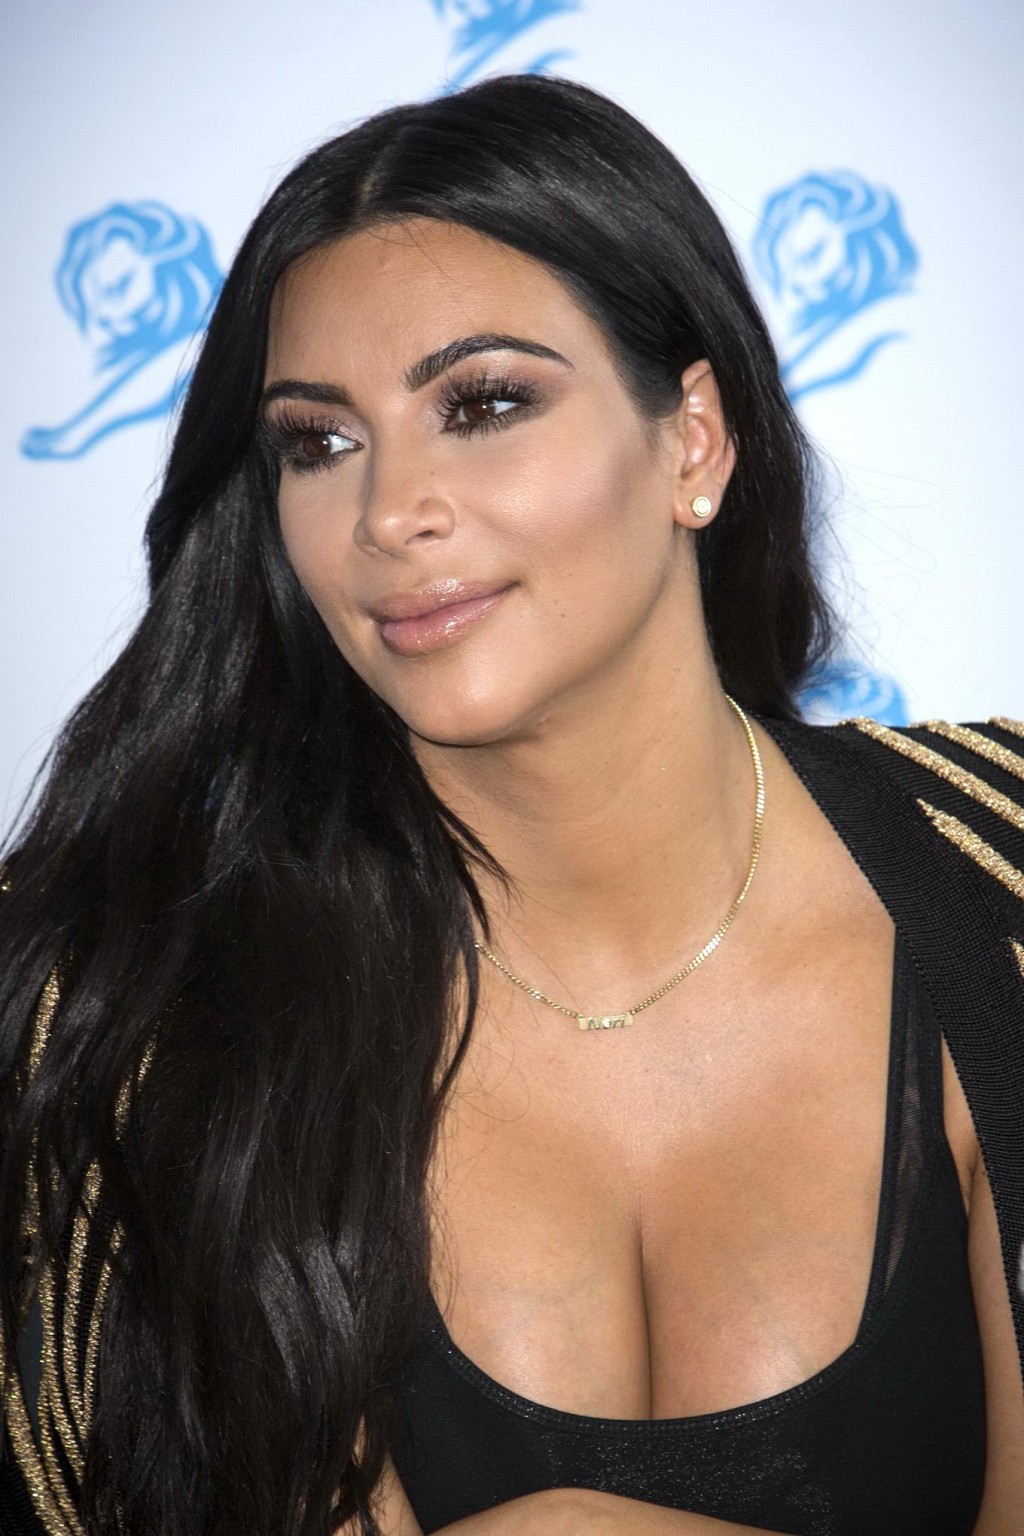 Kim Kardashian showing huge cleavage at the Cannes Lions event #75160407